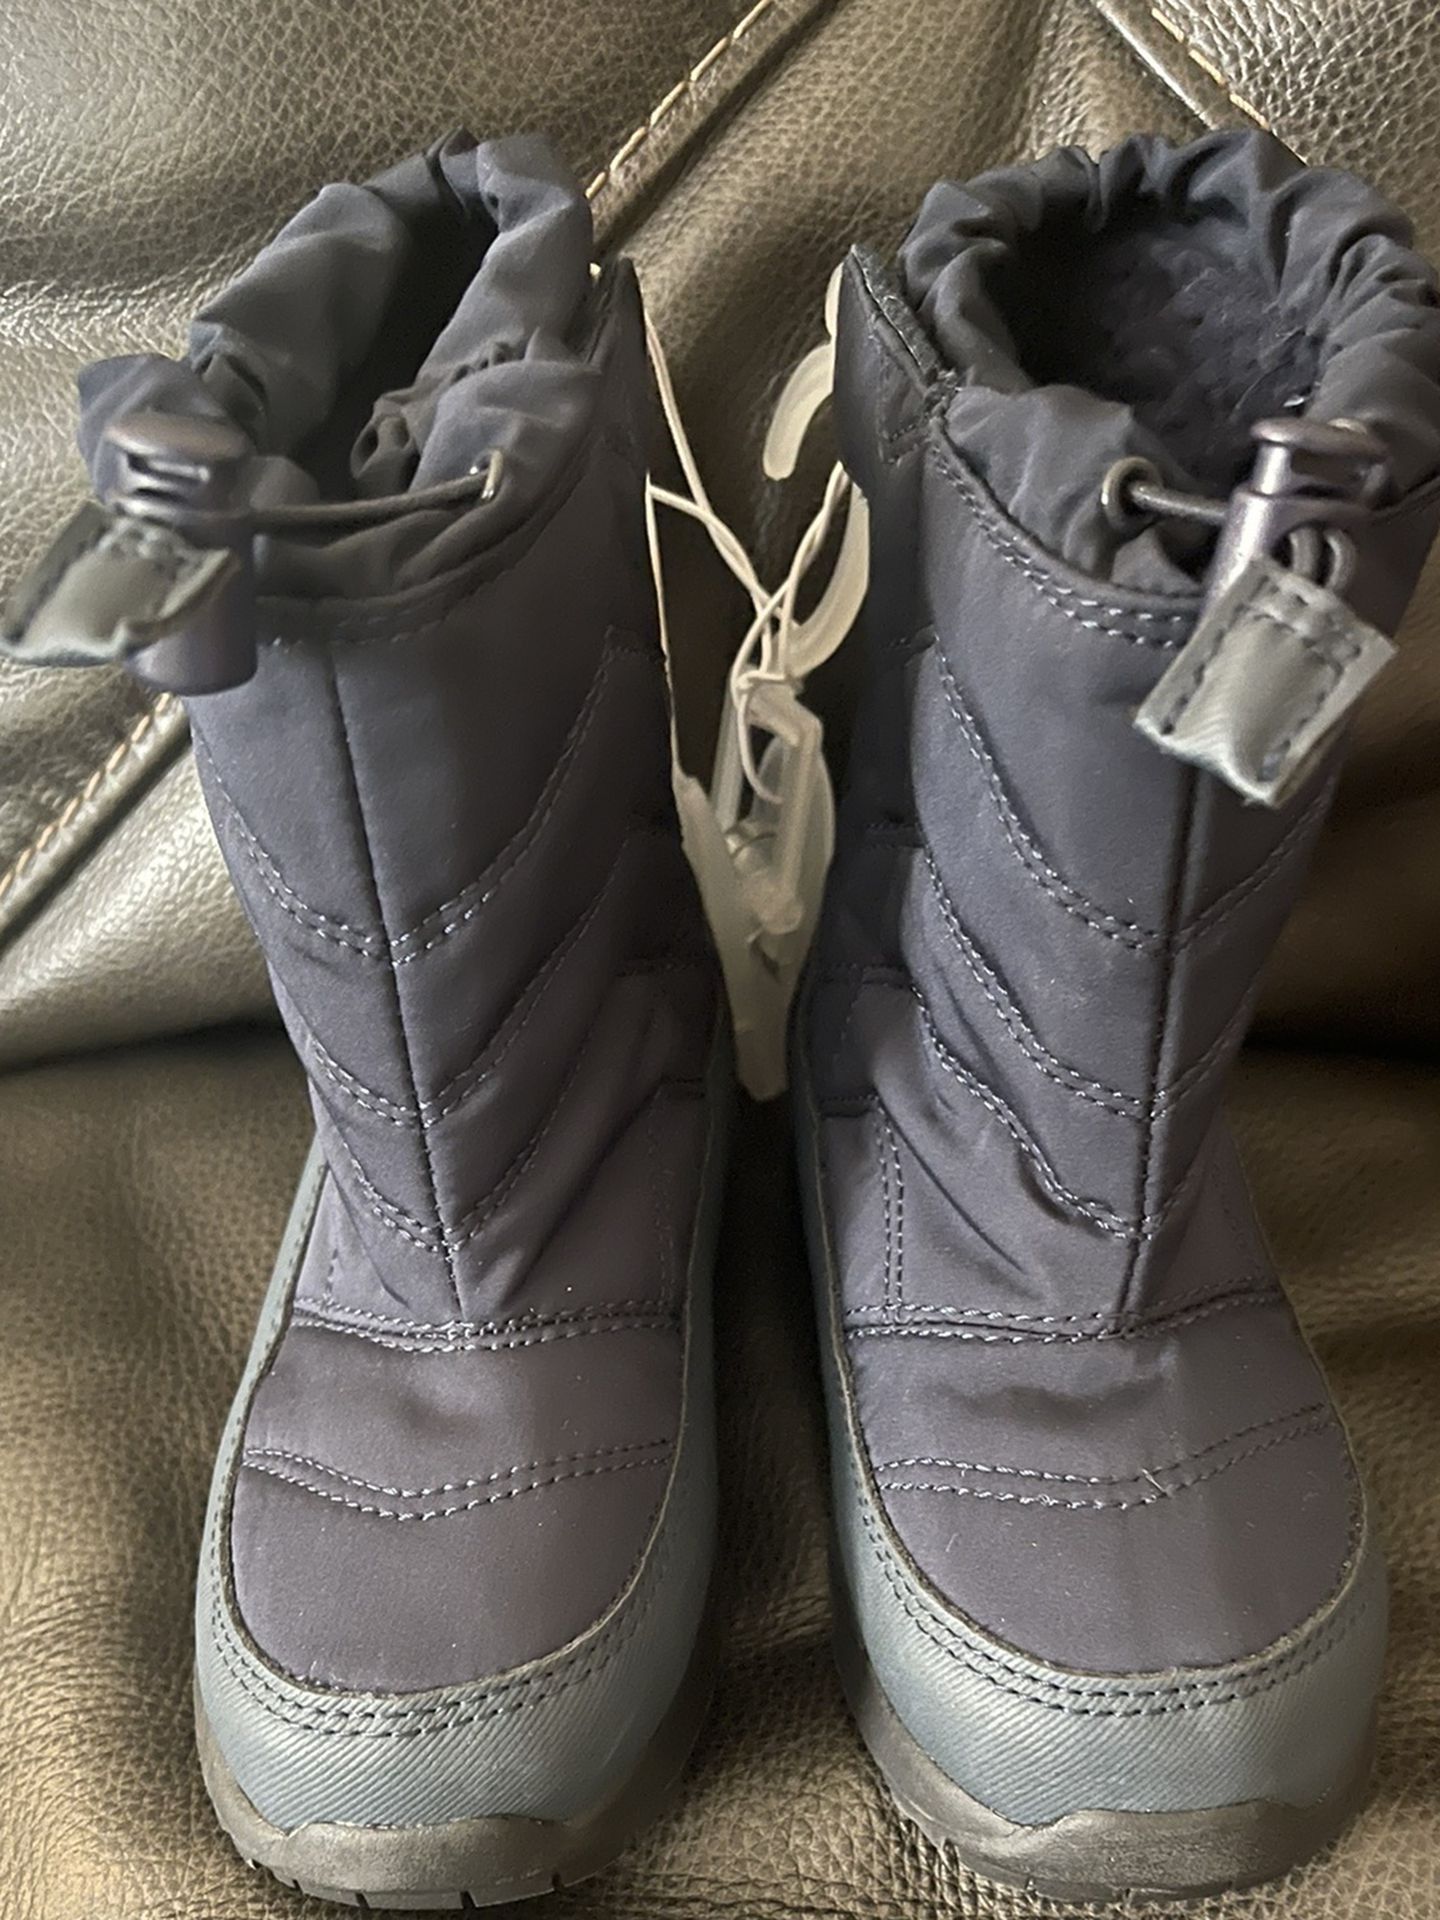 Snow Boots Size 10 Toddler